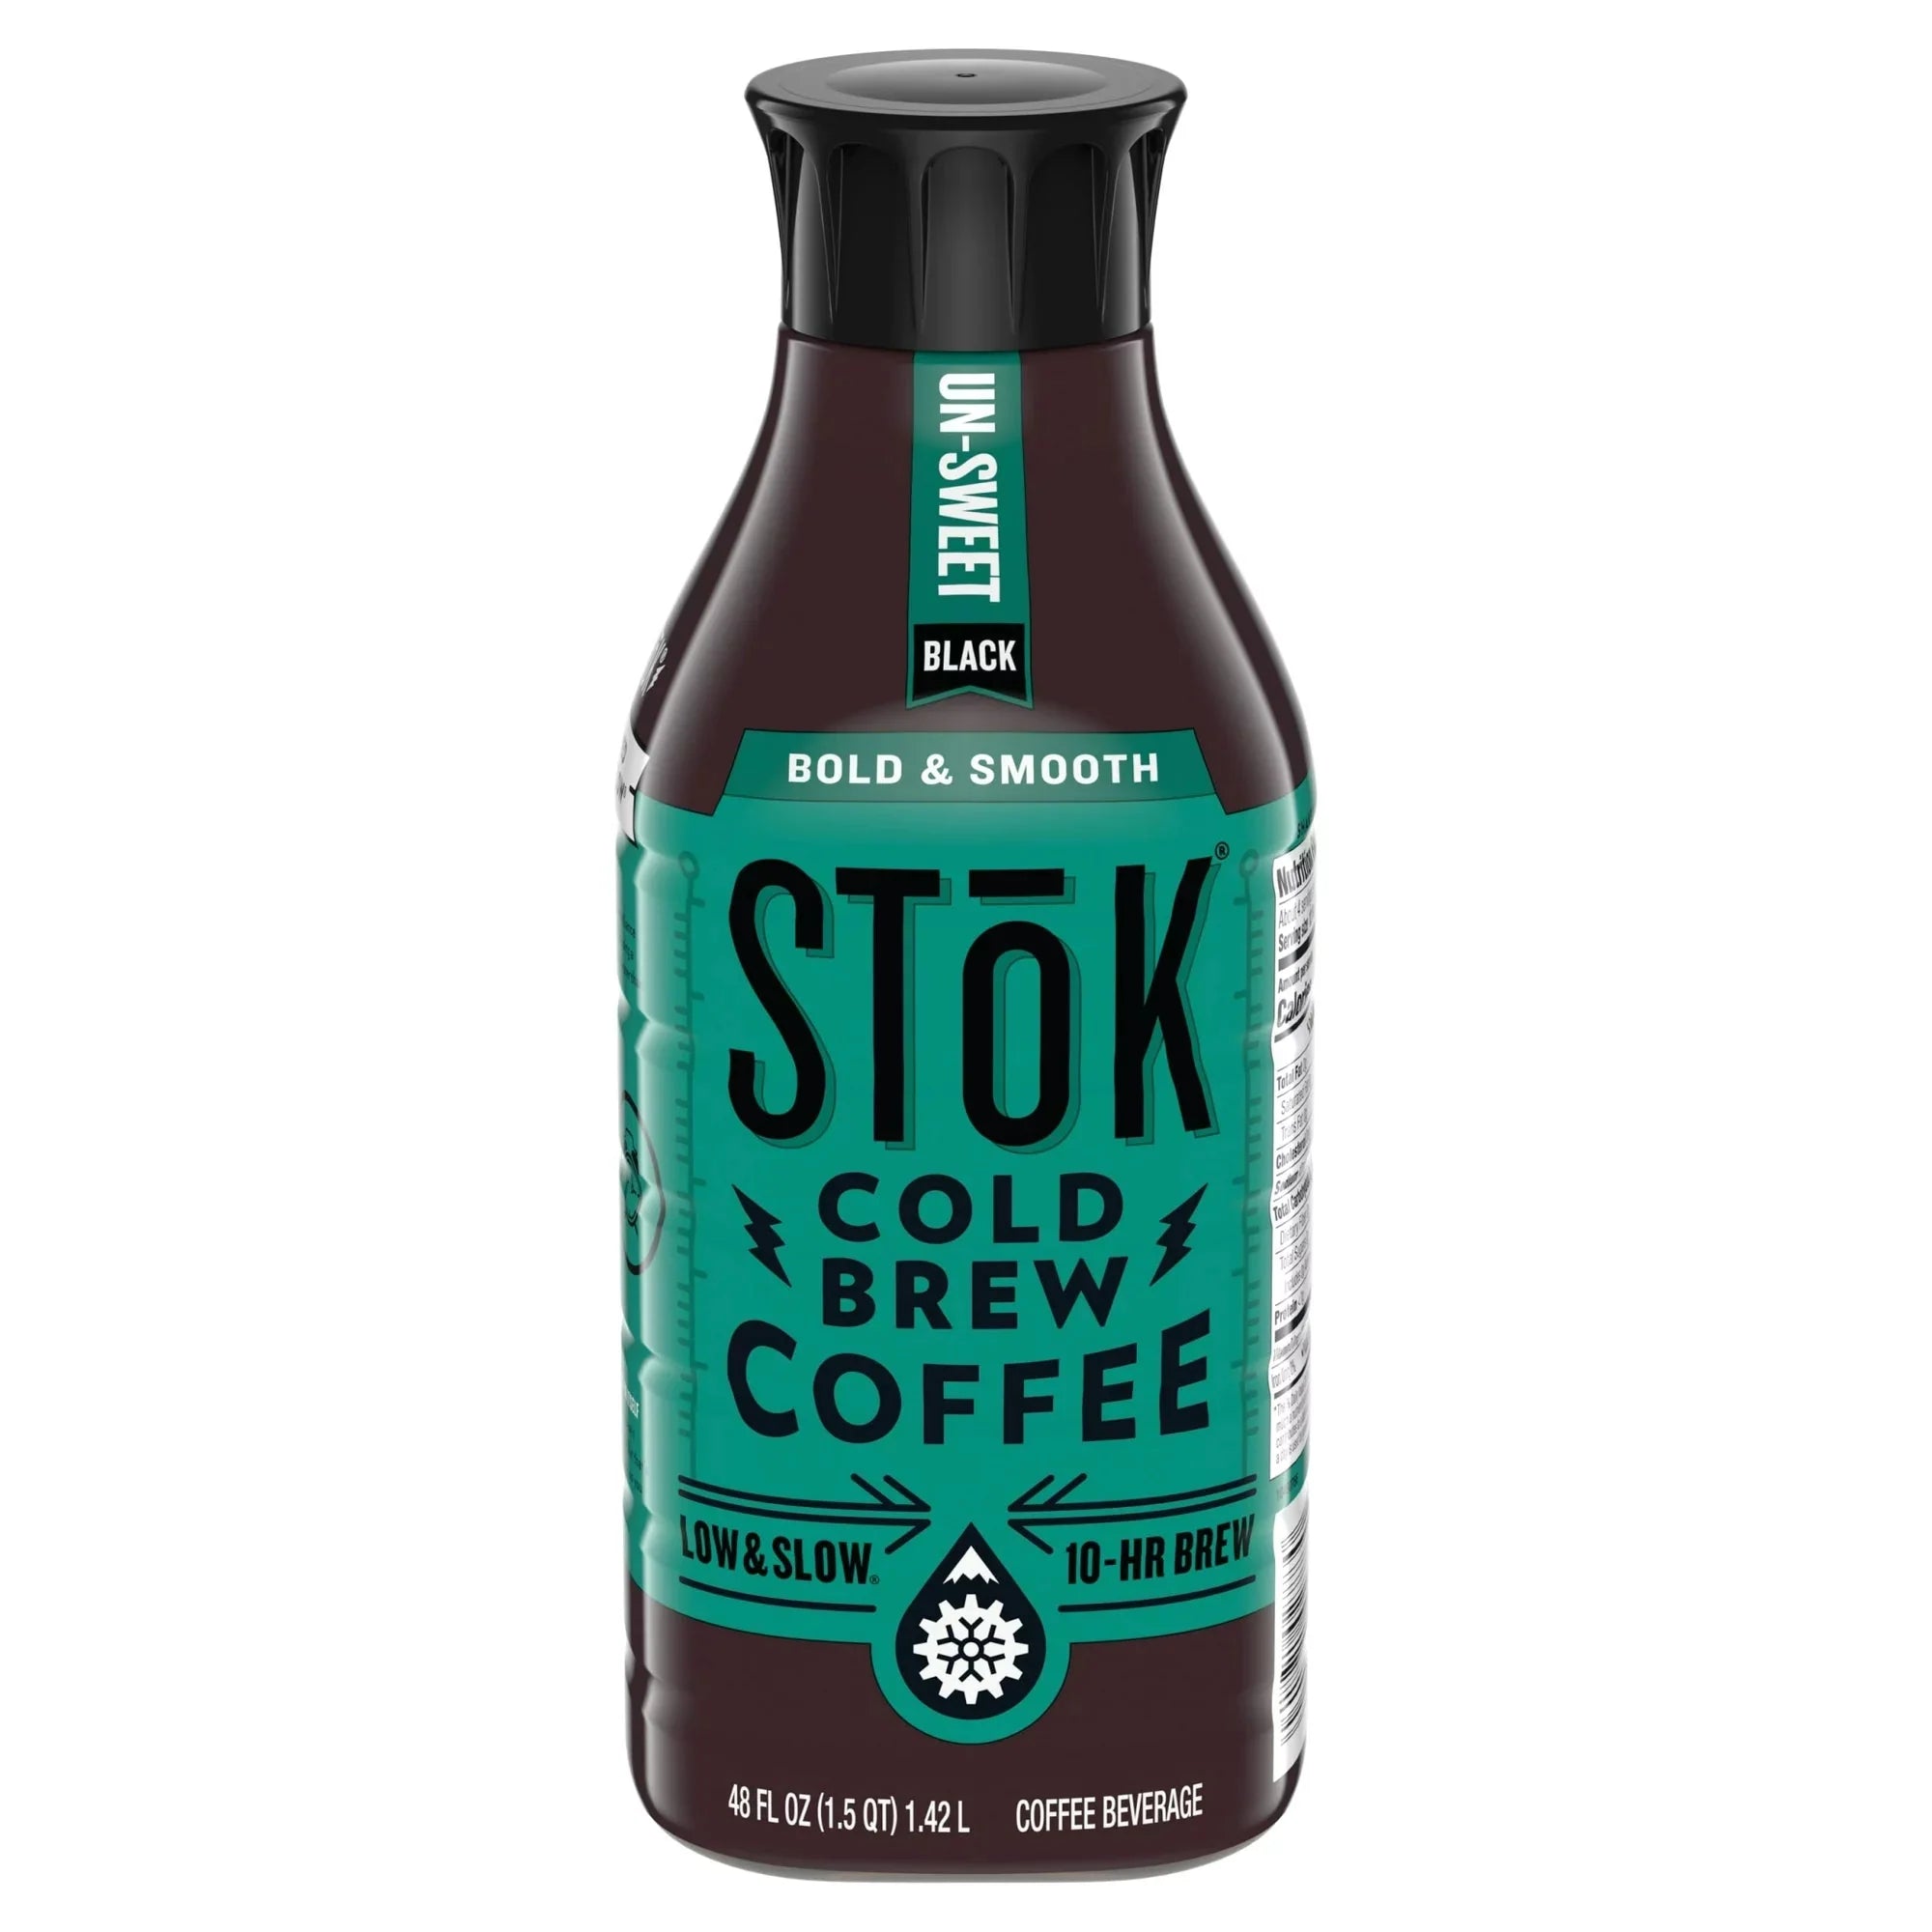 Wholesale prices with free shipping all over United States SToK Black, Unsweetened, Medium Roast Arabica-Based Blend Cold Brew Coffee, 48 fl oz Bottle - Steven Deals